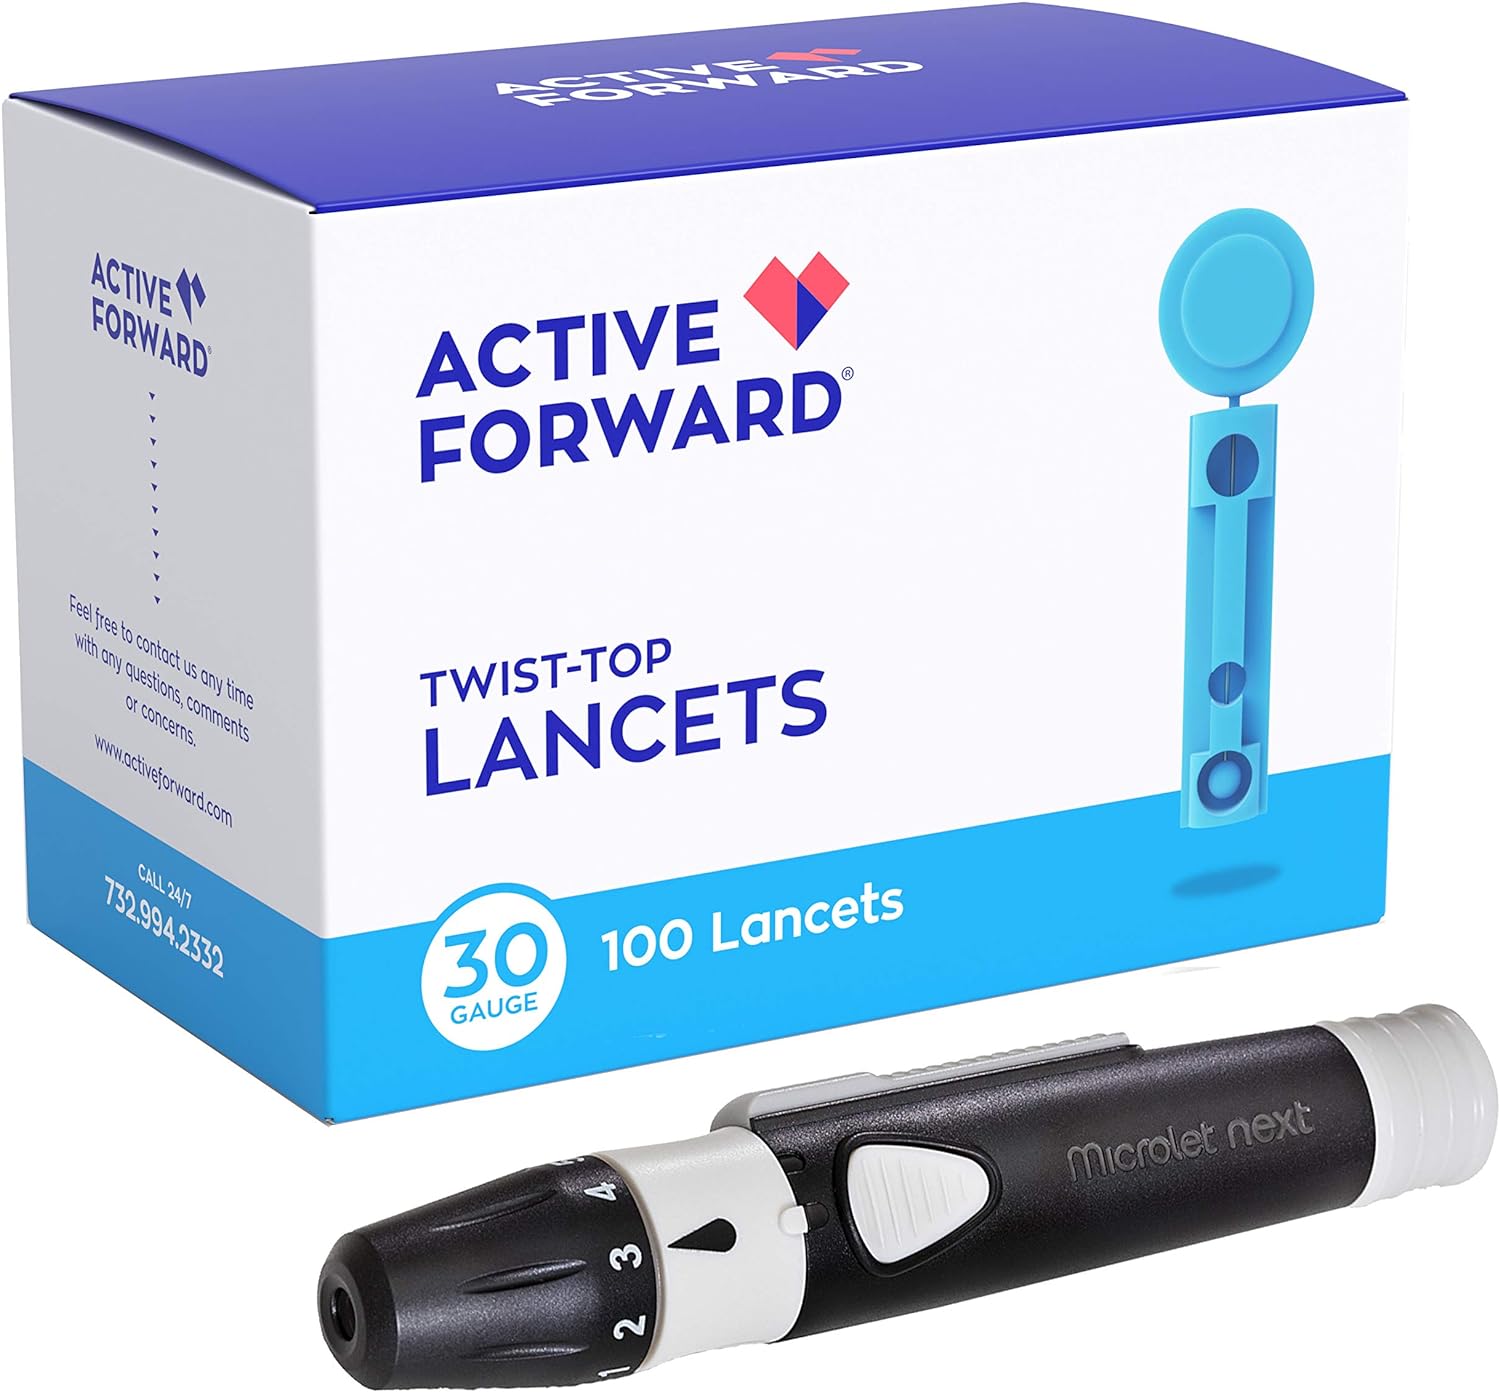 Microlet Lancing Device + 100 Active Forward 30g Lancets Review